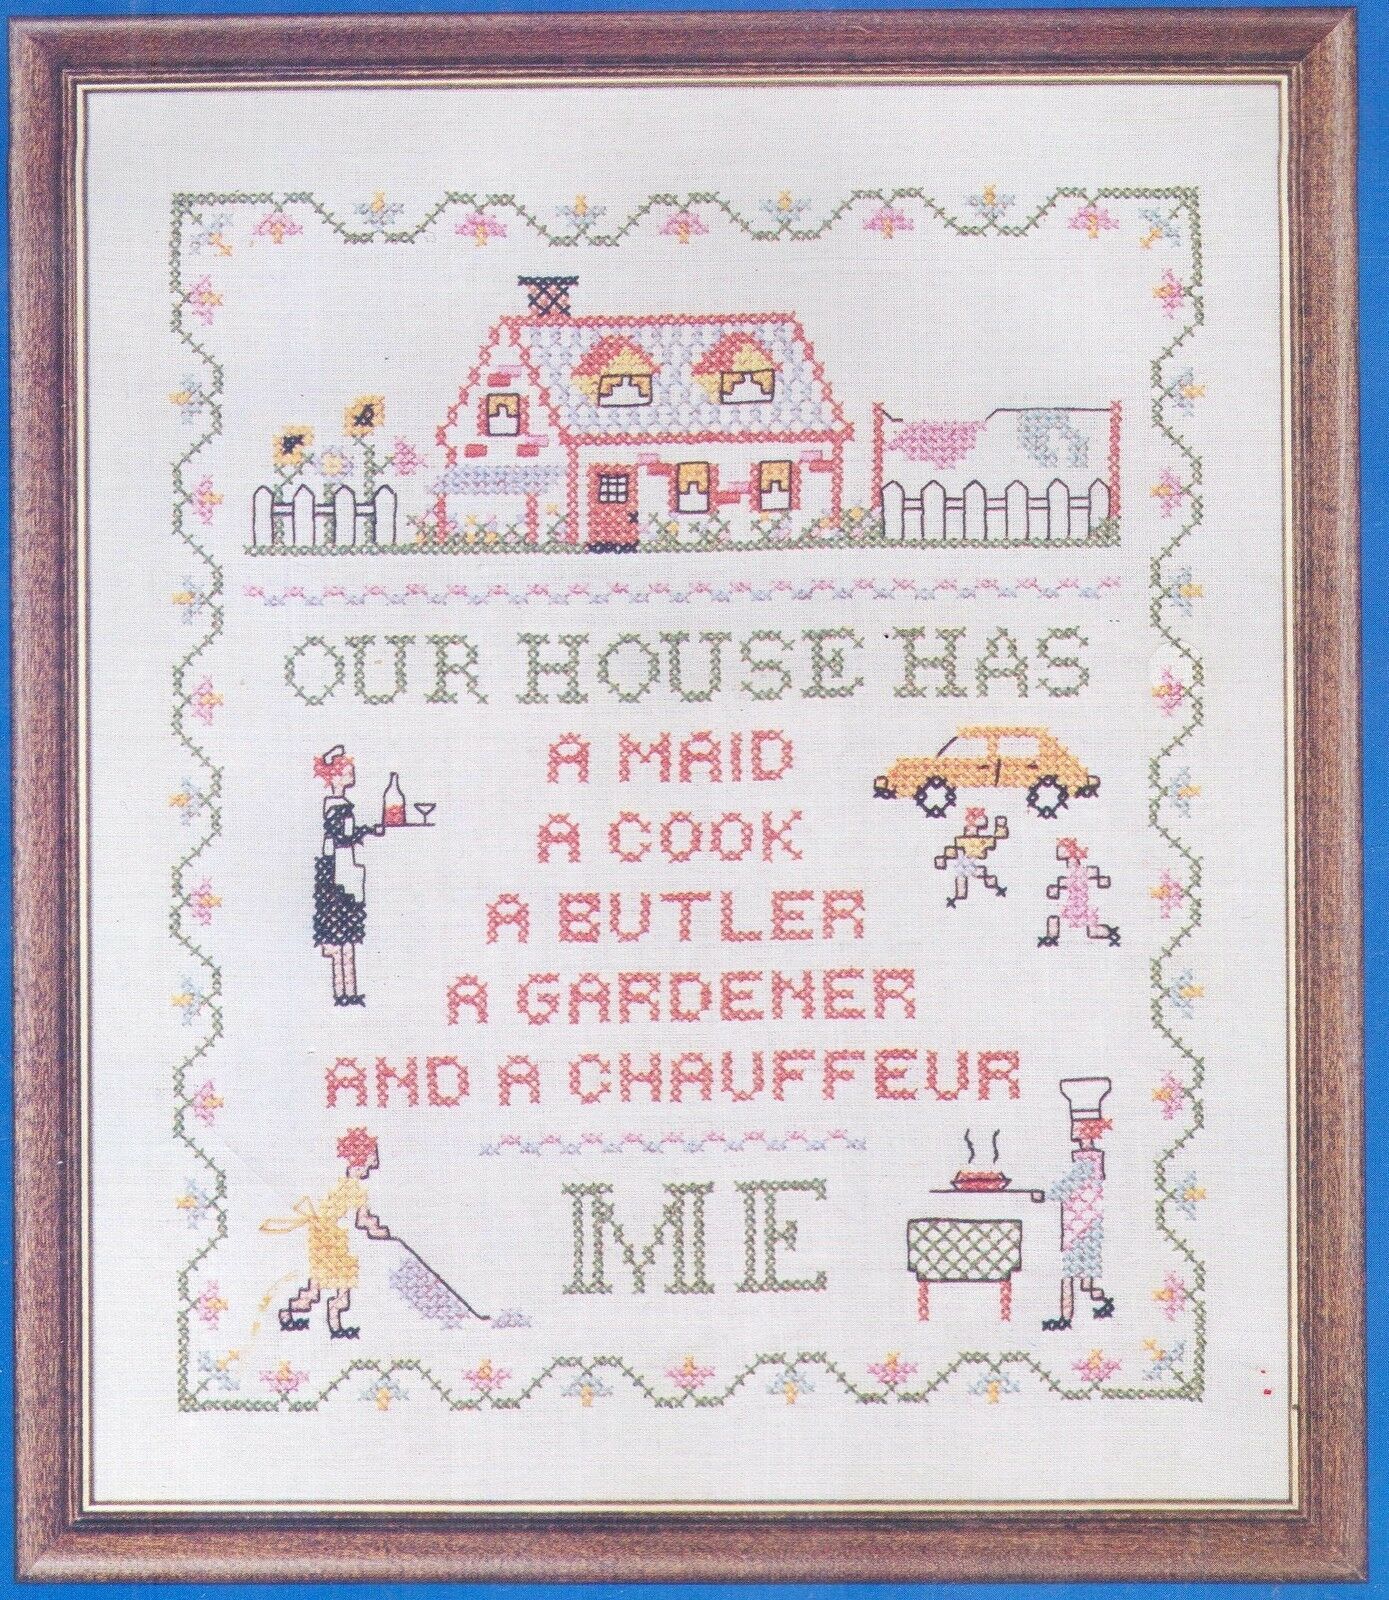 Needles 'N Hoops Easy-To-Do Sampler Kit "Our House" No. 284 12" x 14" - $24.70